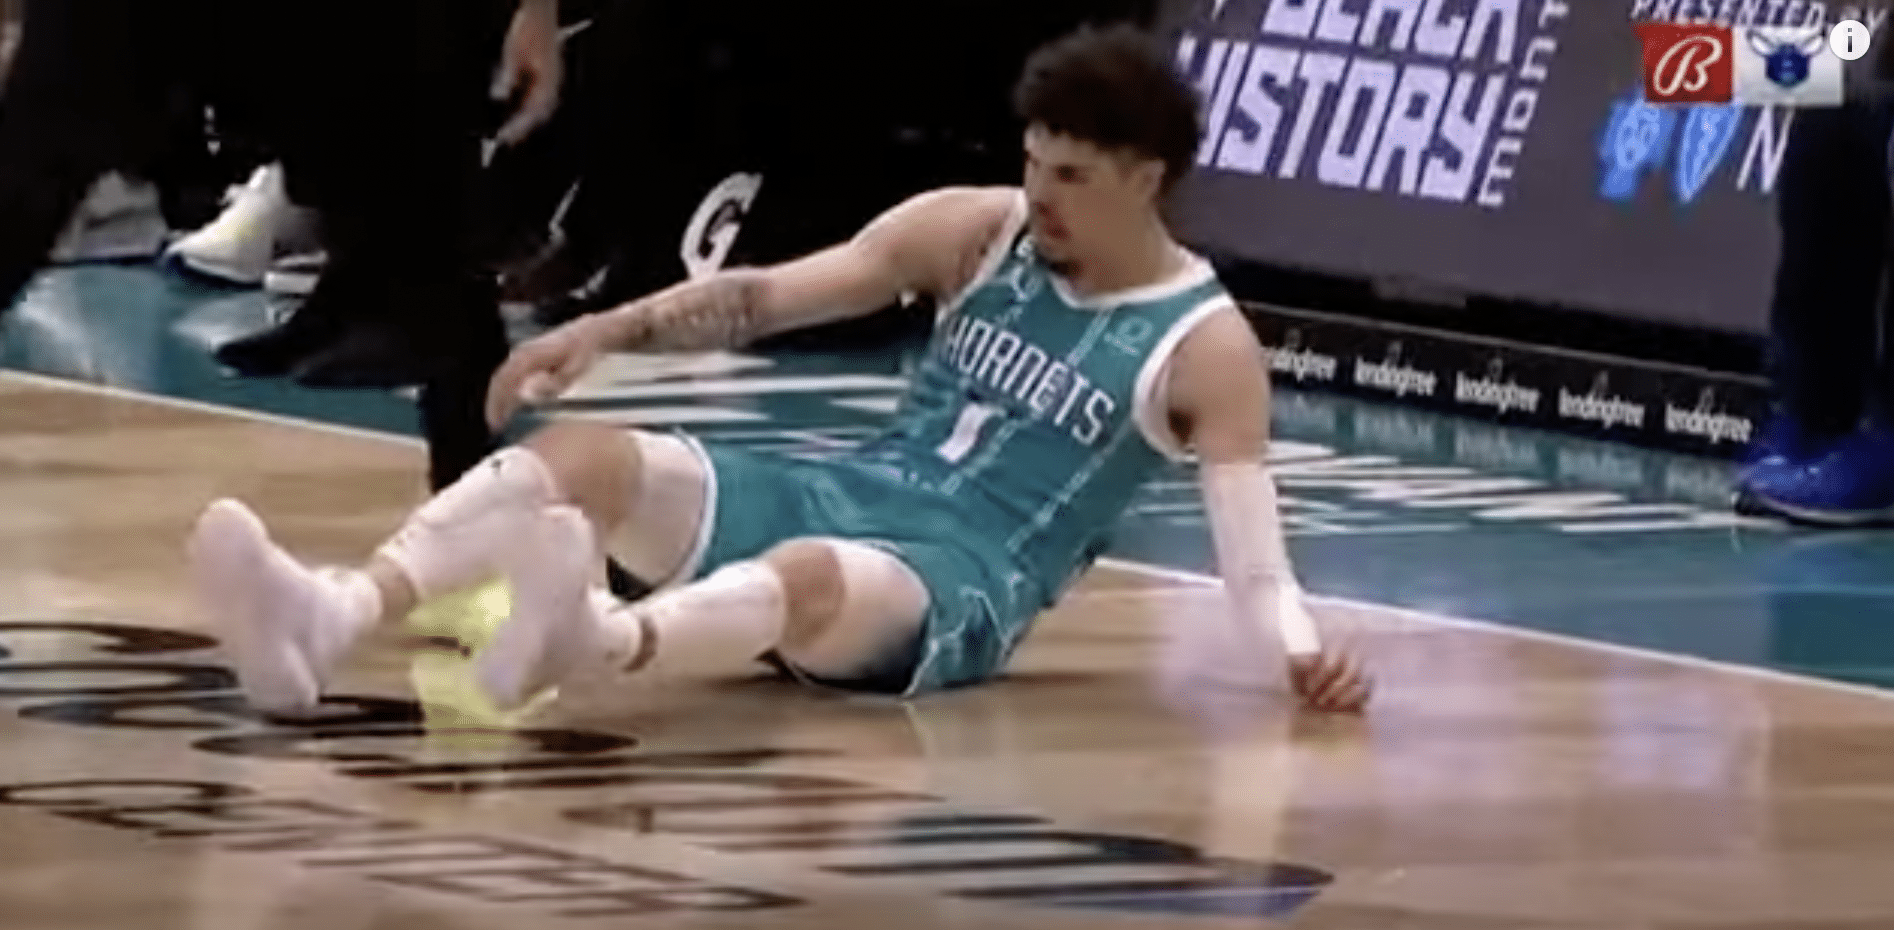 BREAKING: LaMelo Ball Suffers Ankle Injury That Kicks Him Out Of The Game